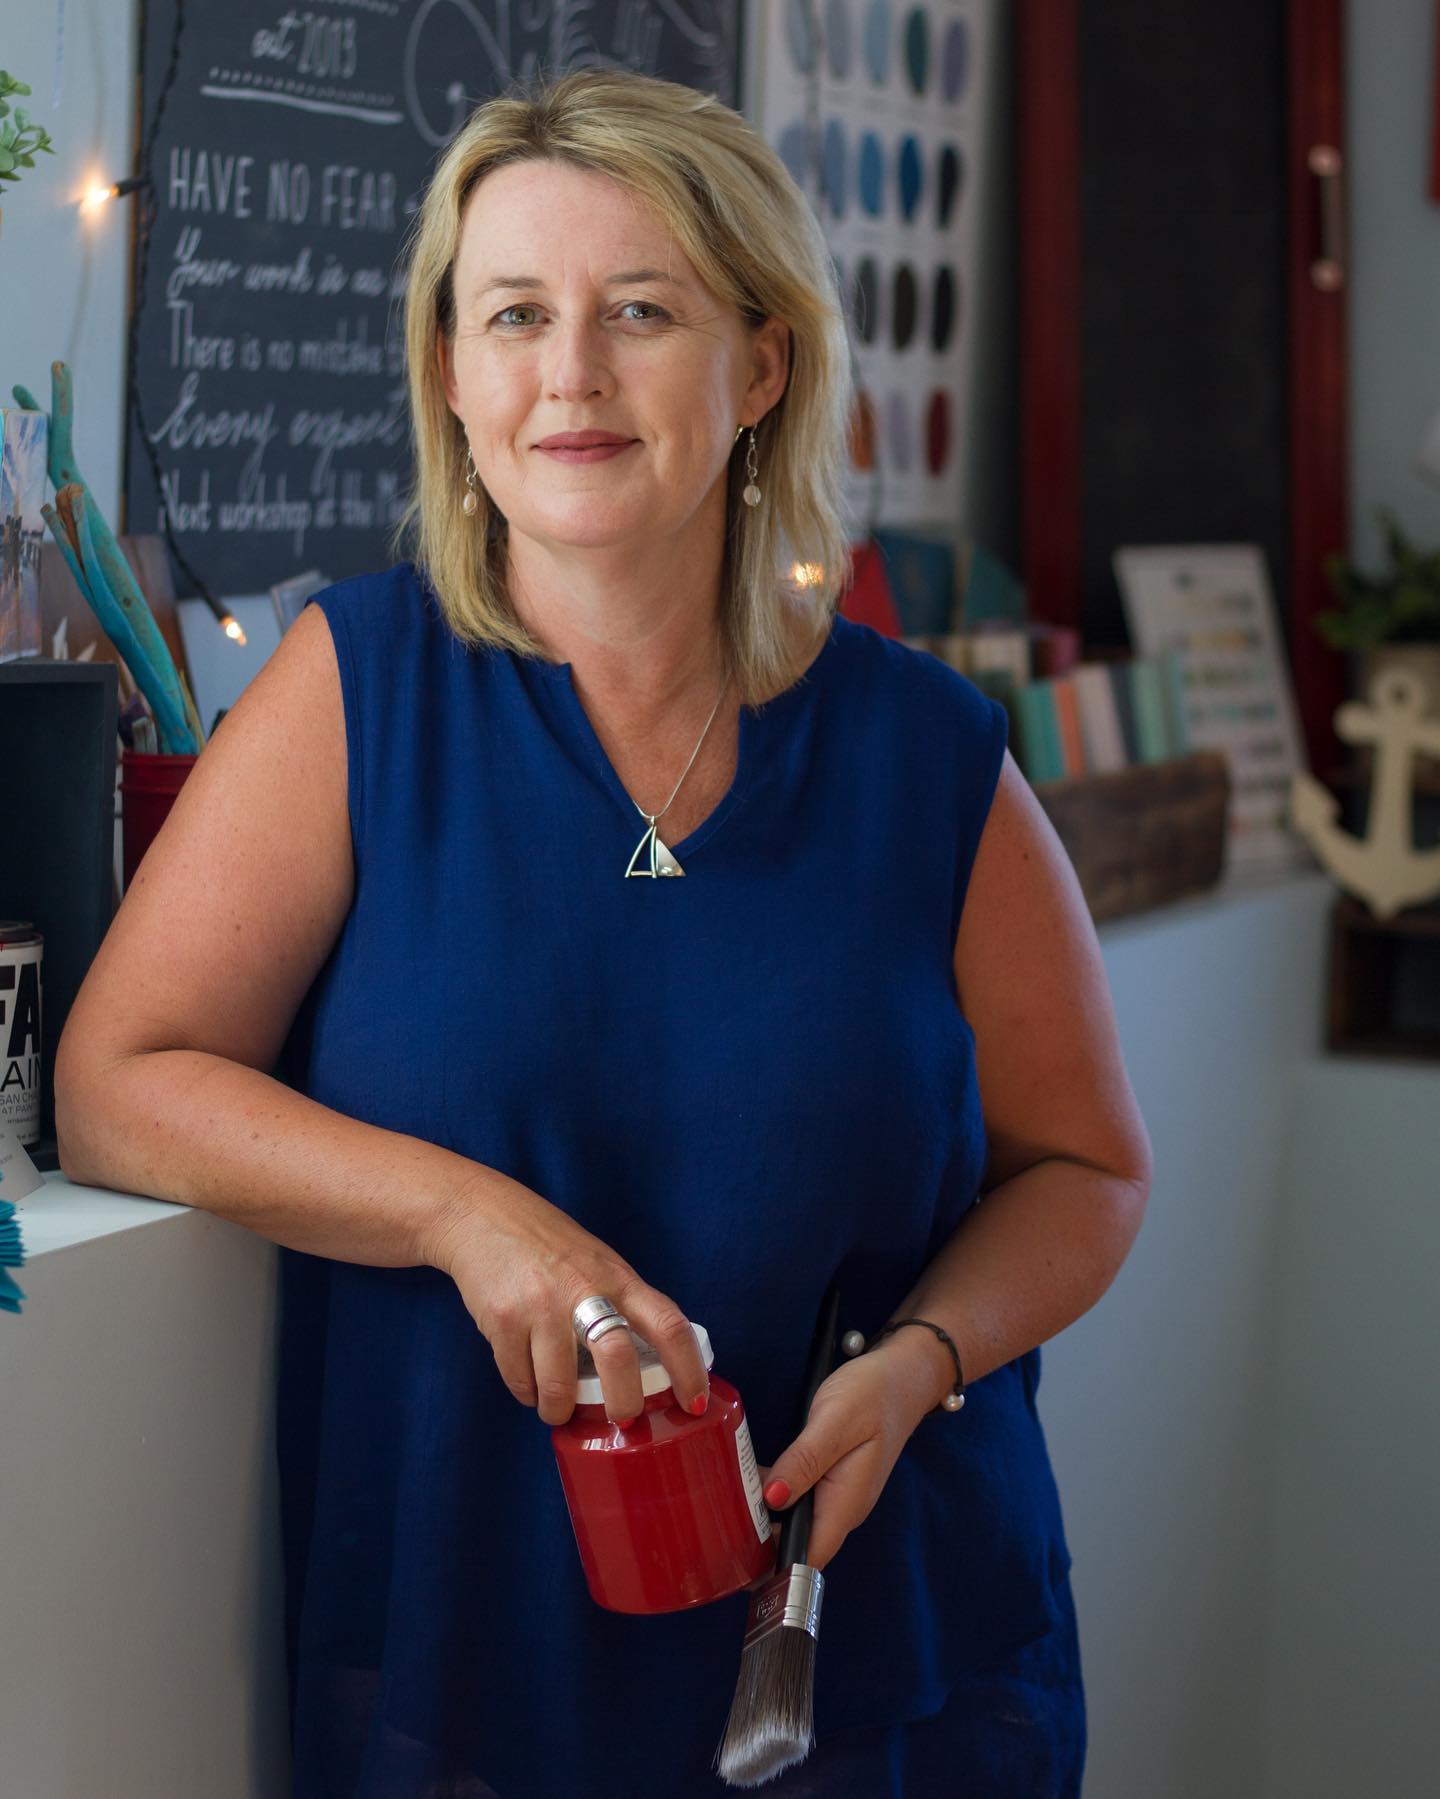 Wendy Batten - small business coach and host of creative shop talk podcast 